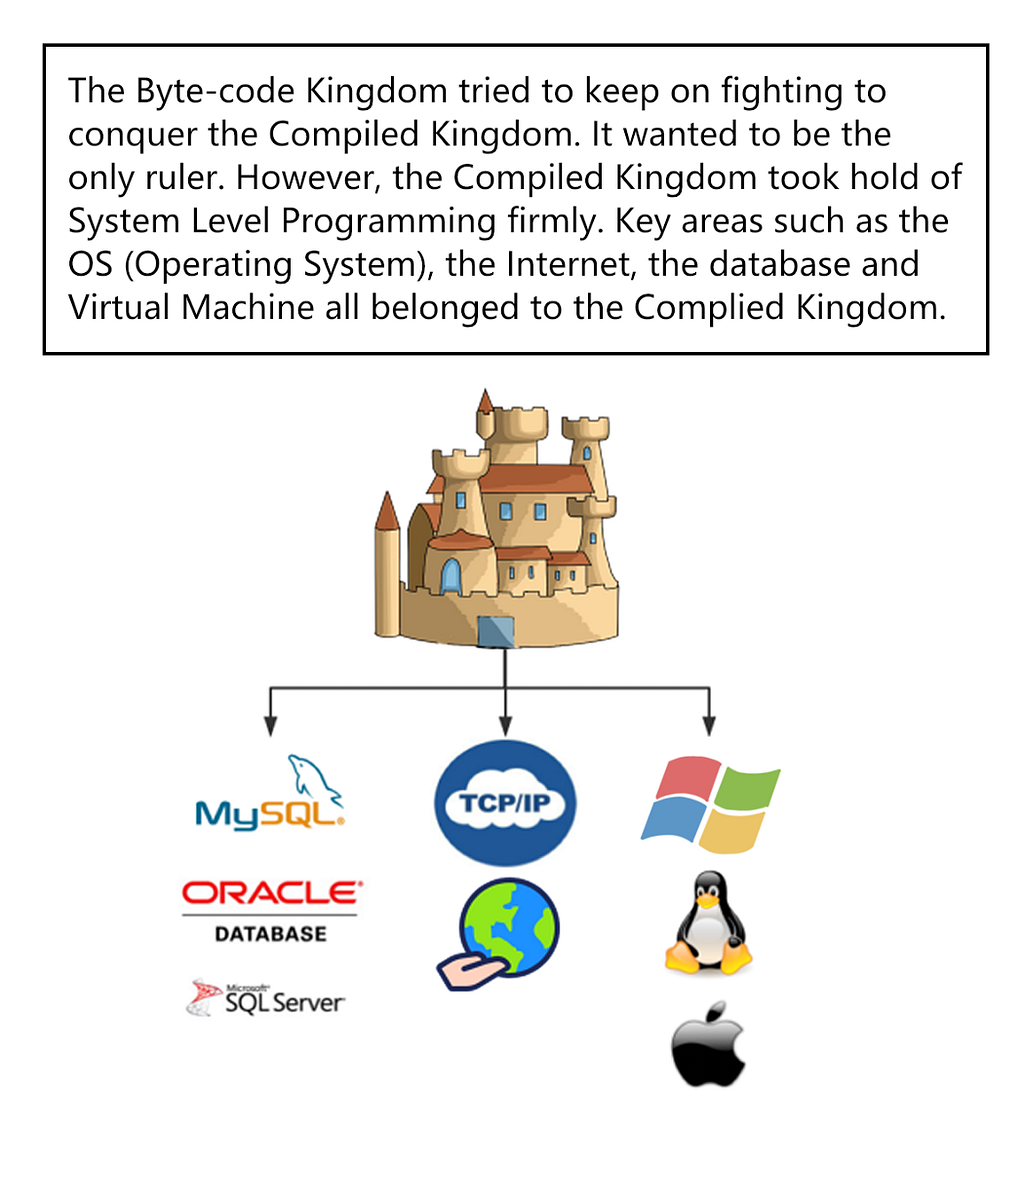 The Byte-code Kingdom tried to keep on fighting to conquer the Compiled Kingdom. It wanted to be the only ruler. However, the Compiled Kingdom took hold of System Level Programming firmly. Key areas such as the OS (Operating System), the Internet, the database and Virtual Machine all belonged to the Complied Kingdom.